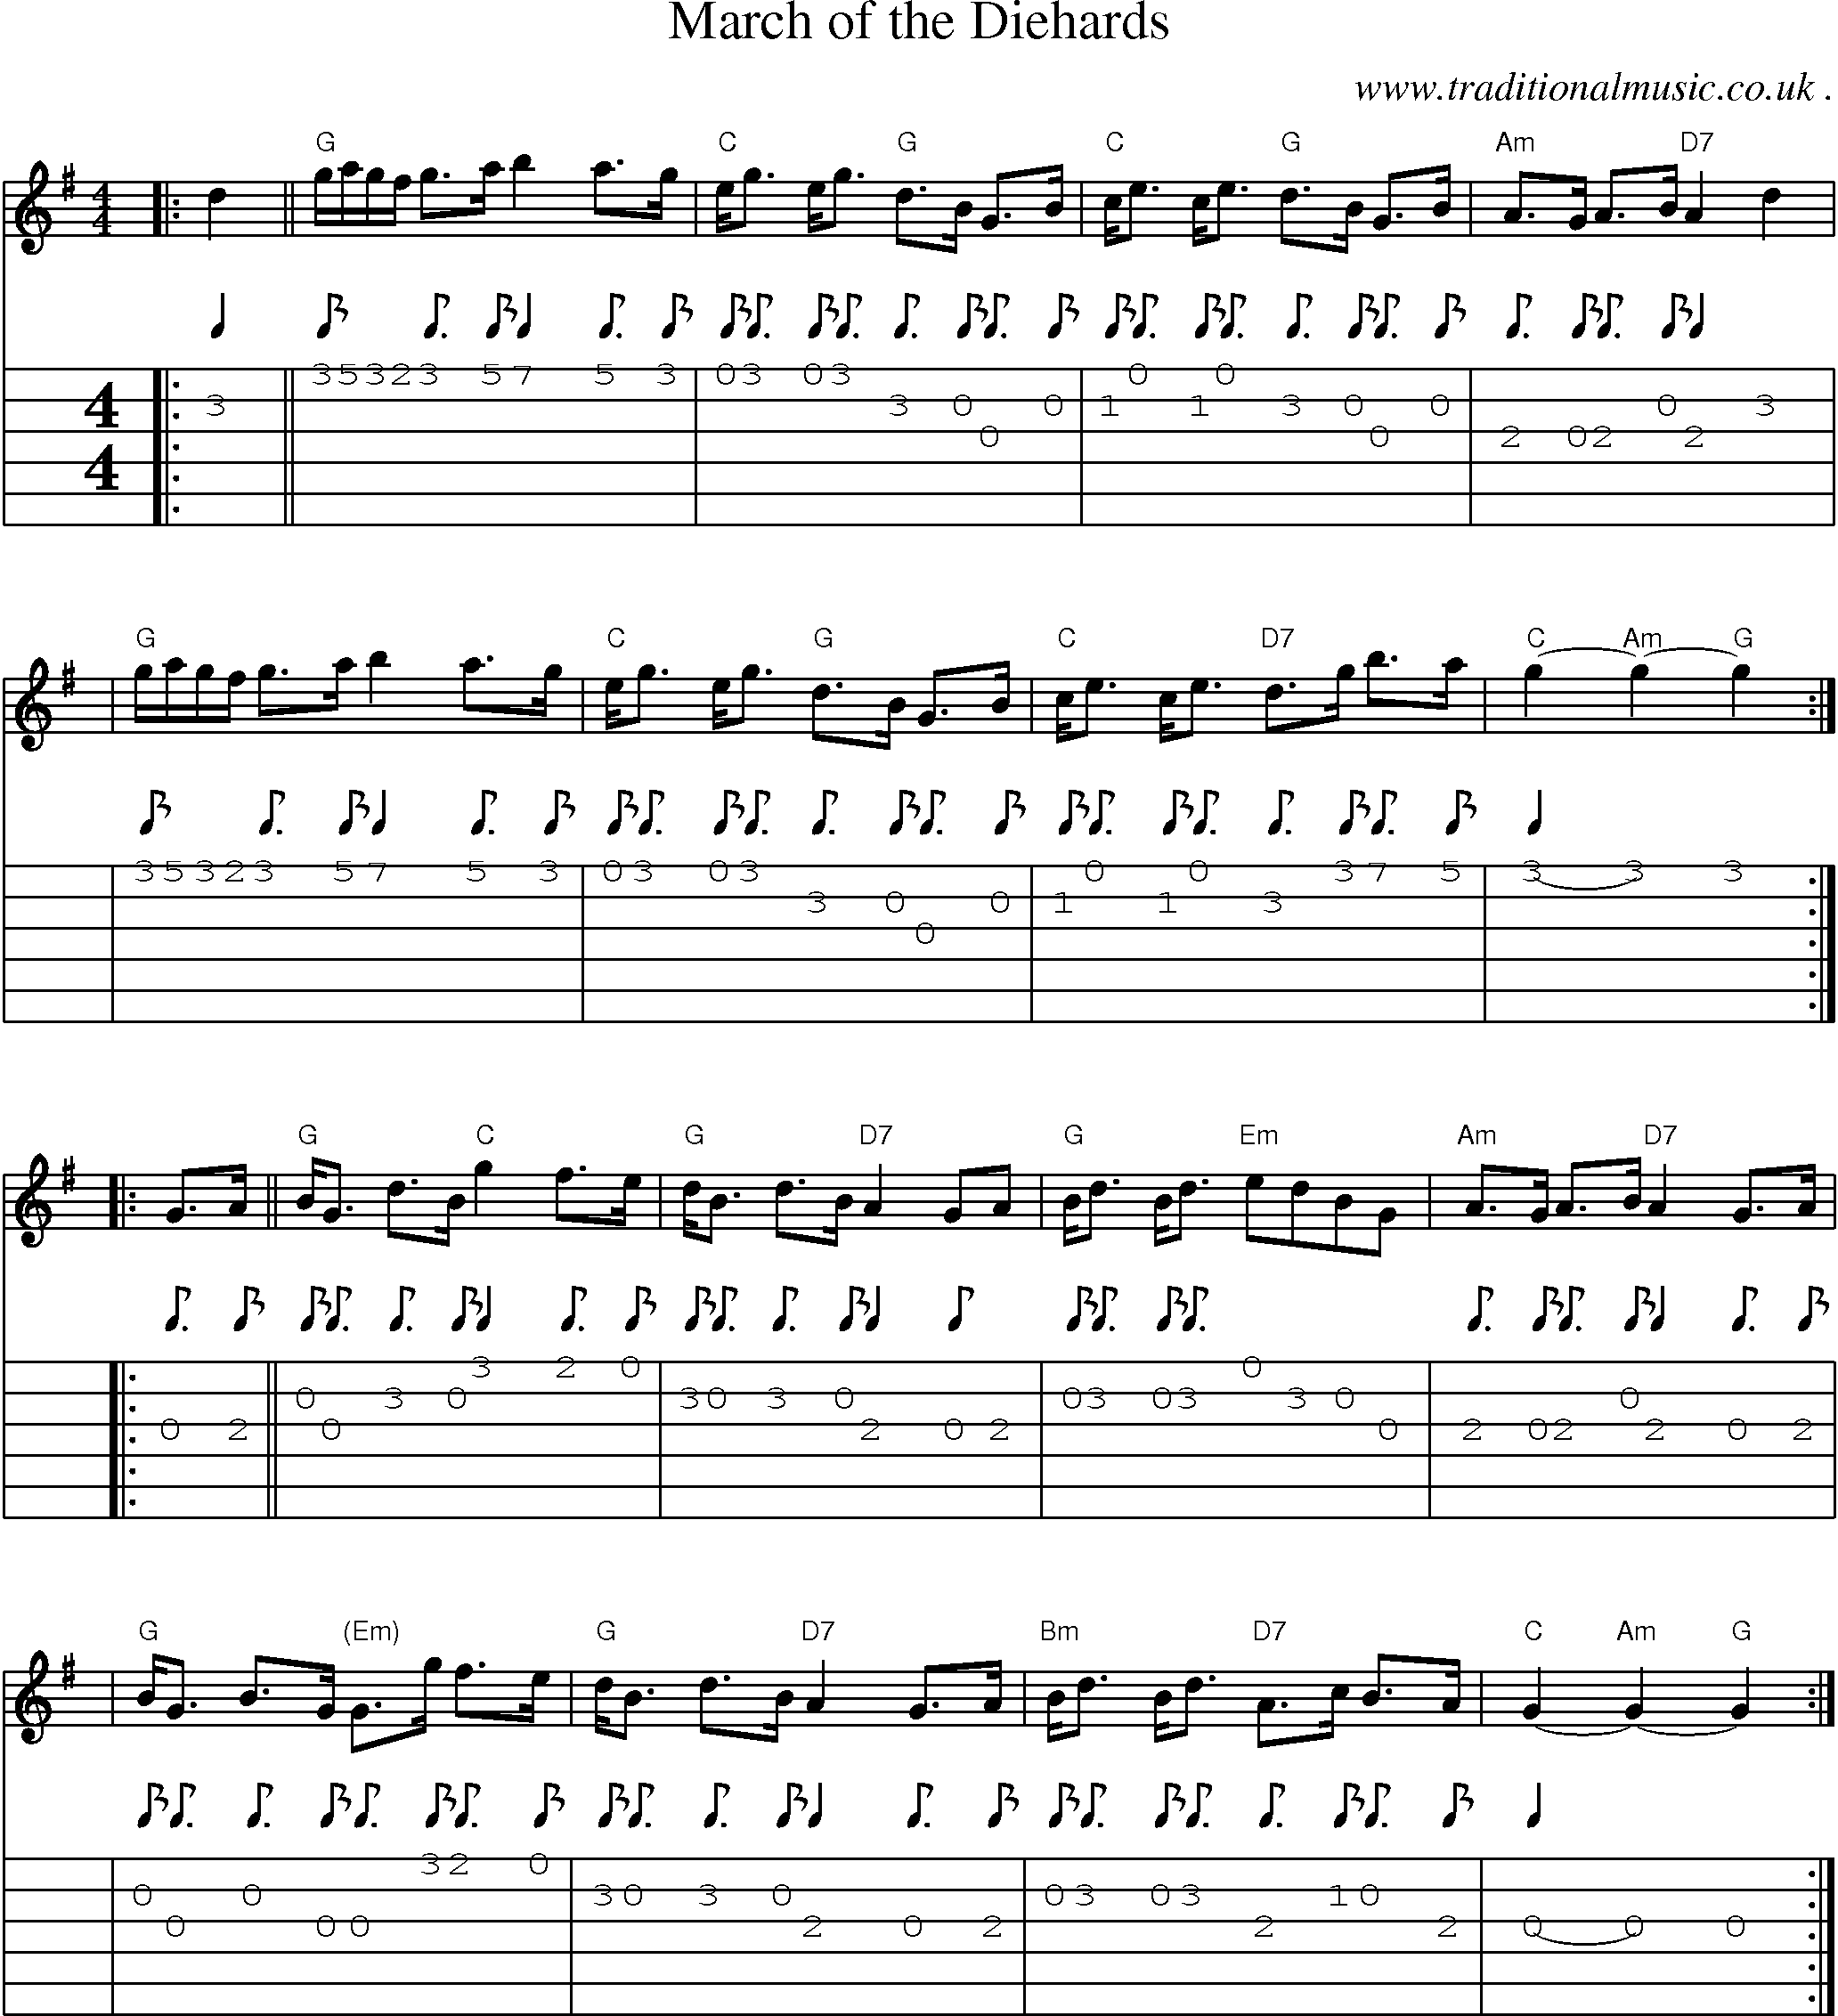 Sheet-music  score, Chords and Guitar Tabs for March Of The Diehards